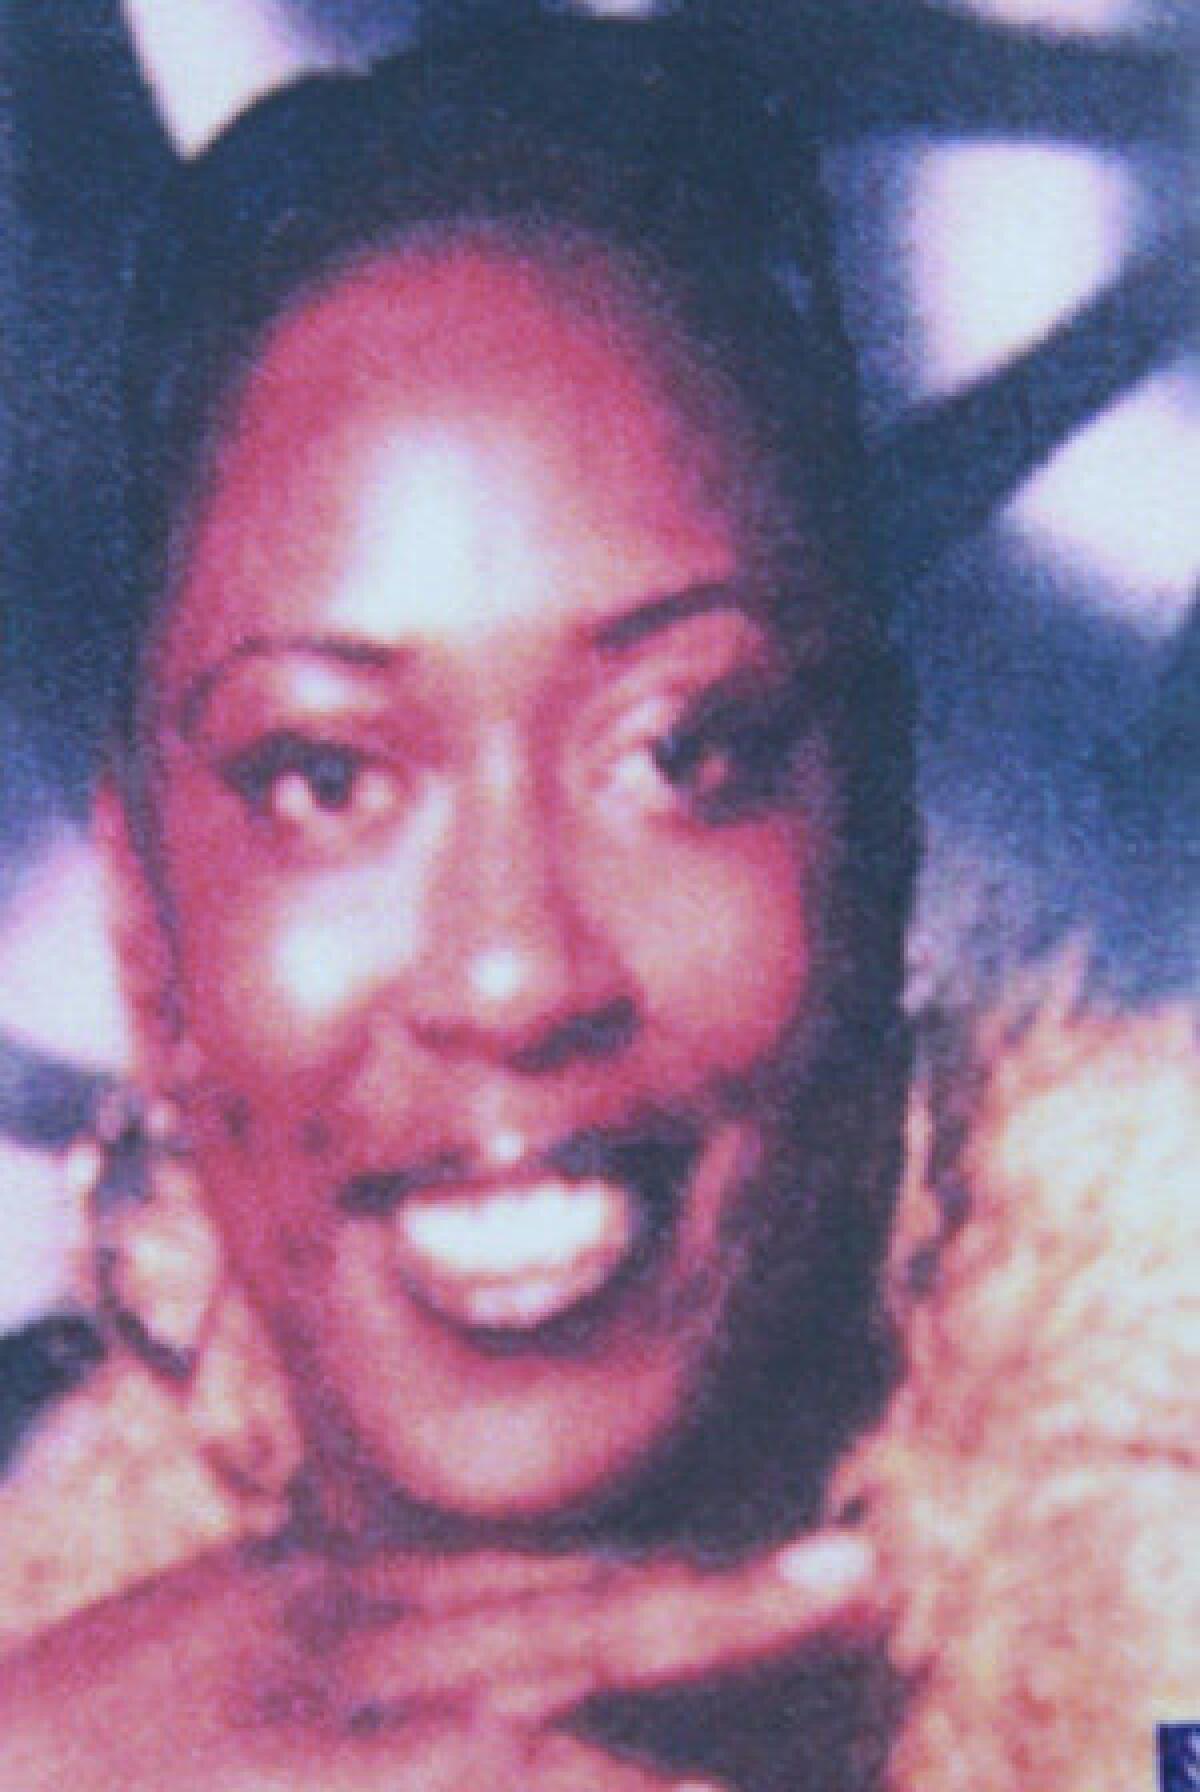 Alesia Thomas, 35, died at a hospital after being arrested in July 2012.